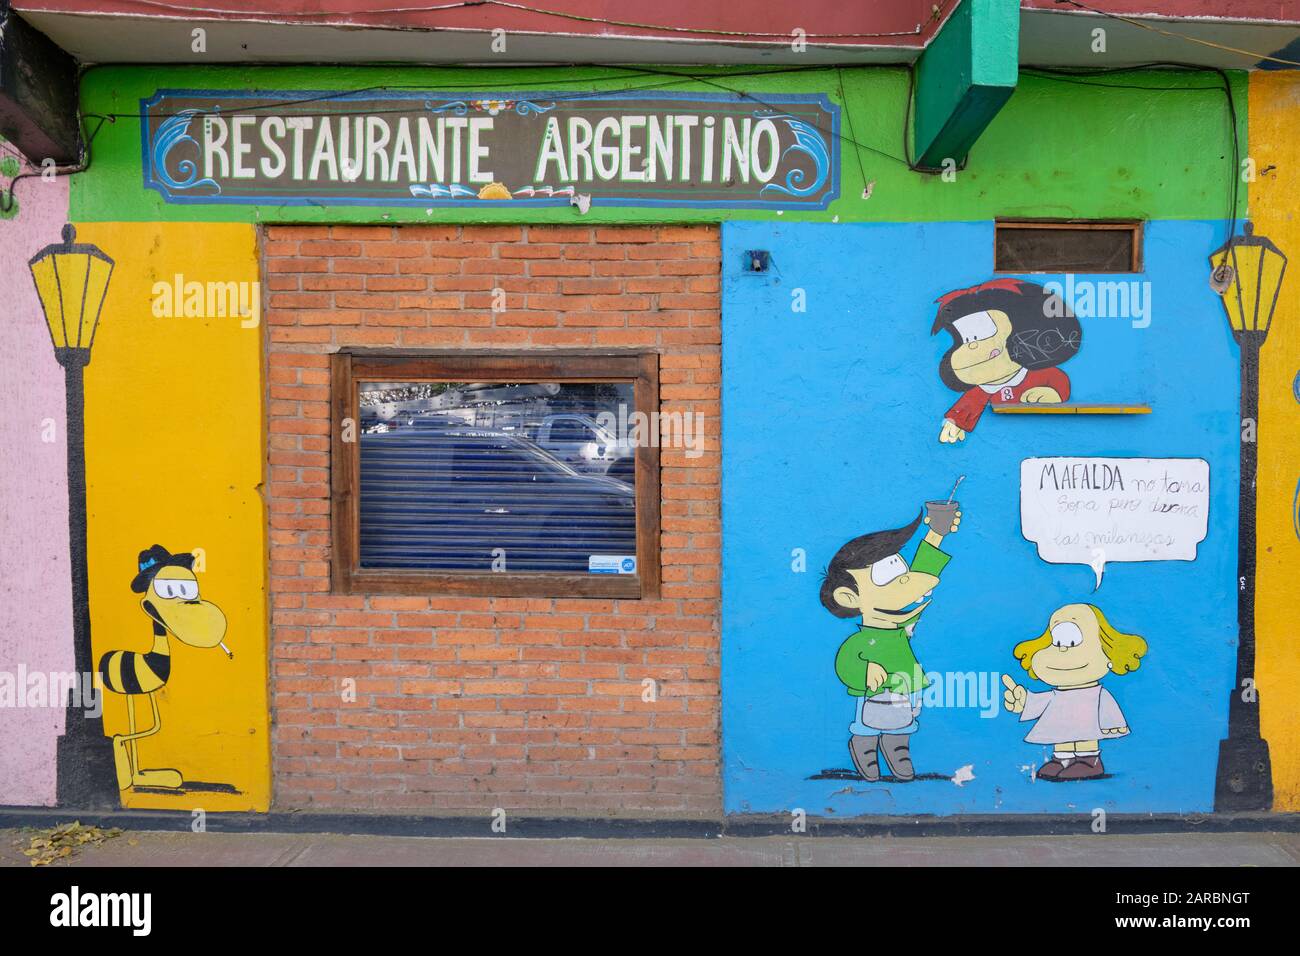 Argentinian restaurant in Mexico City, featuring wall art depicting cartoon character Mafalda, her sister and friend. Stock Photo